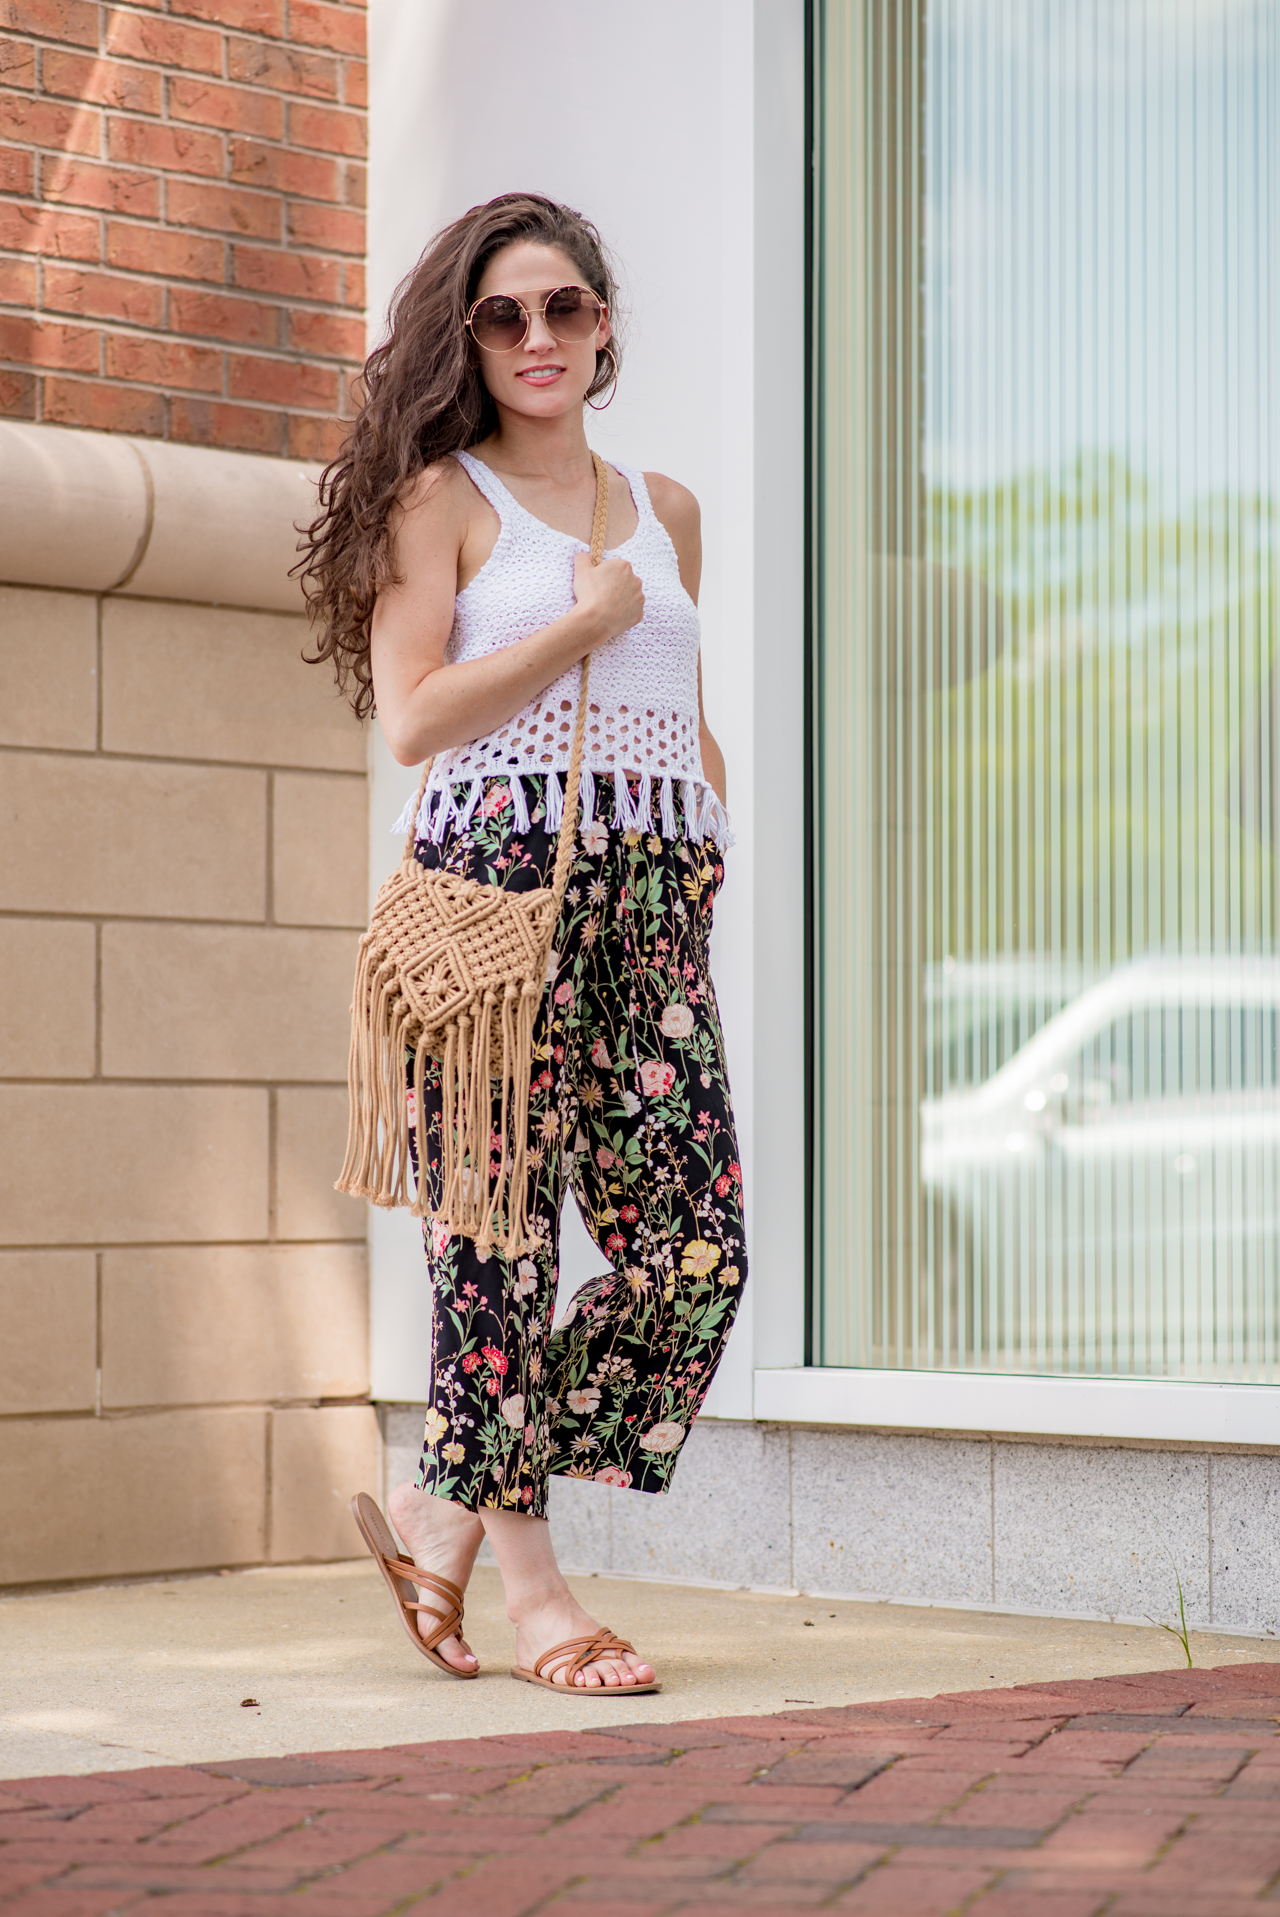 boho style, ootd, outfit of the day, style blogger, atlanta bloggers, atlanta style bloggers, atlanta influencers, loft, floral pants, palazzo pants, blogging, rewardstyle, palazzo pants, fringe top, crochet fringe bag, Erica Valentin, boho style